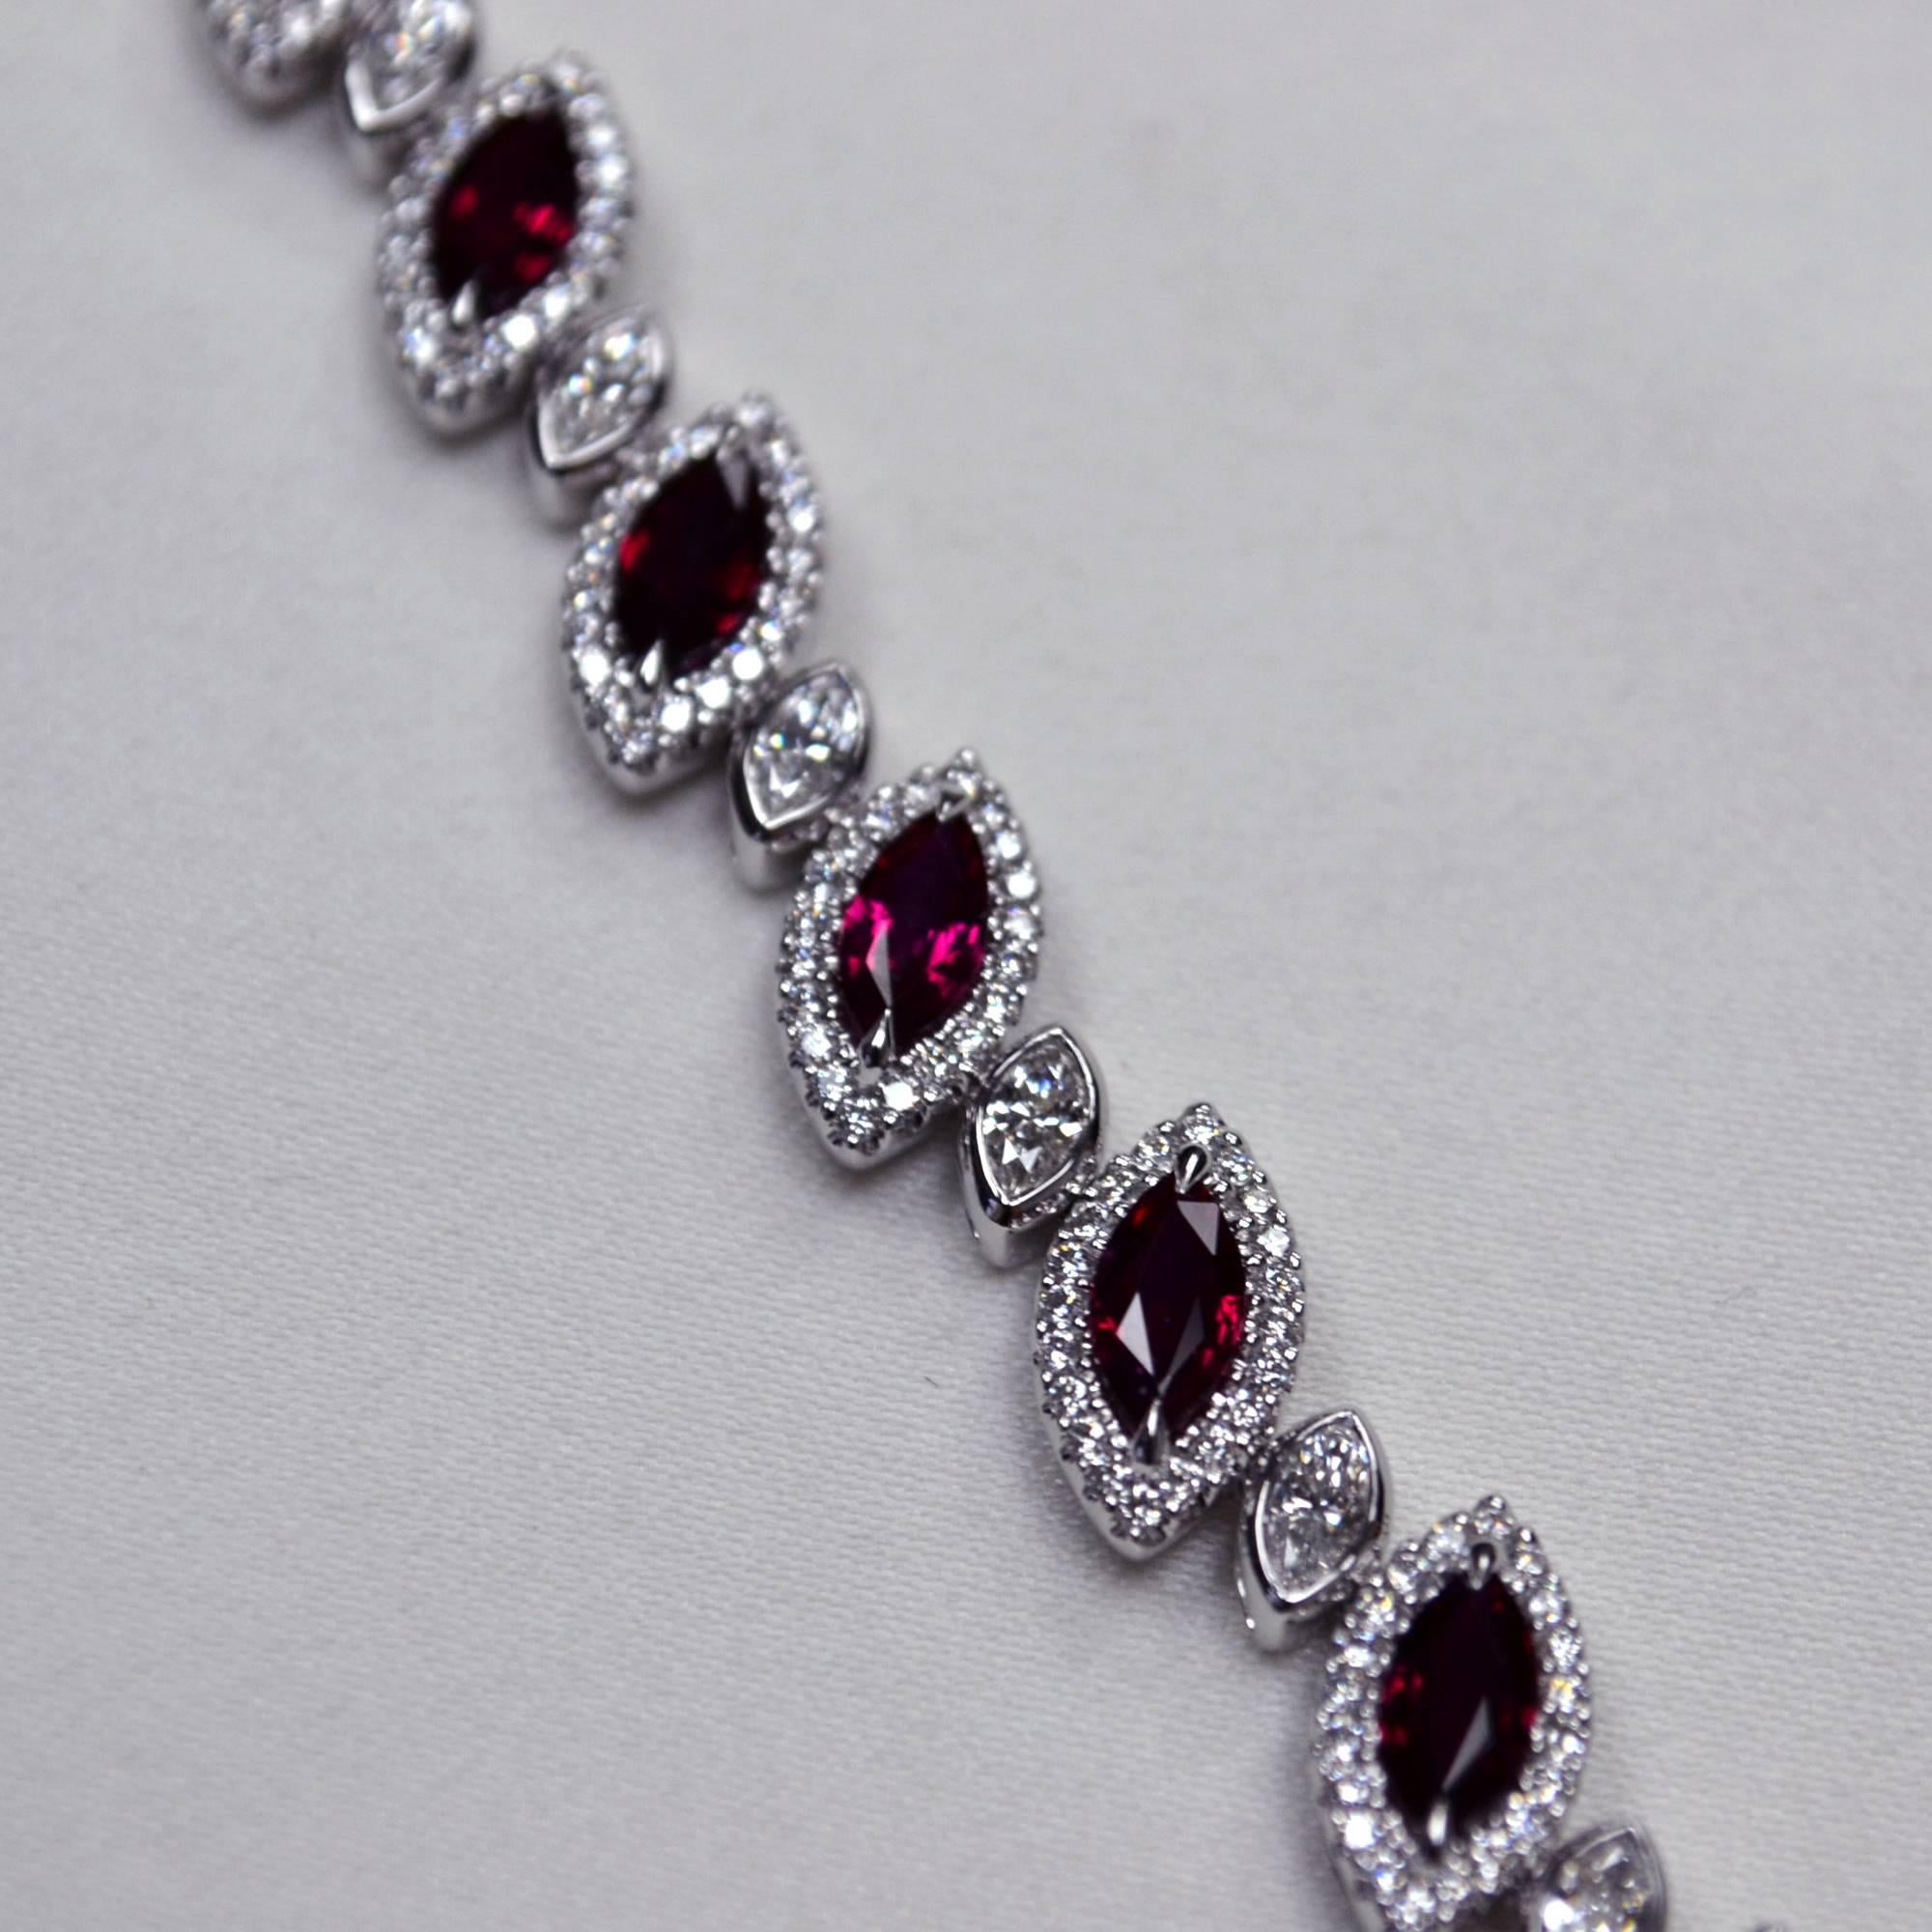 Bracelet in 18 karat white gold set with 15 vivid red marquise cut Mozambique Rubies (6.19 carats), 15 marquise cut Diamonds (1.33 carats), and 300 round brilliant-cut Diamonds (1.52 carats).